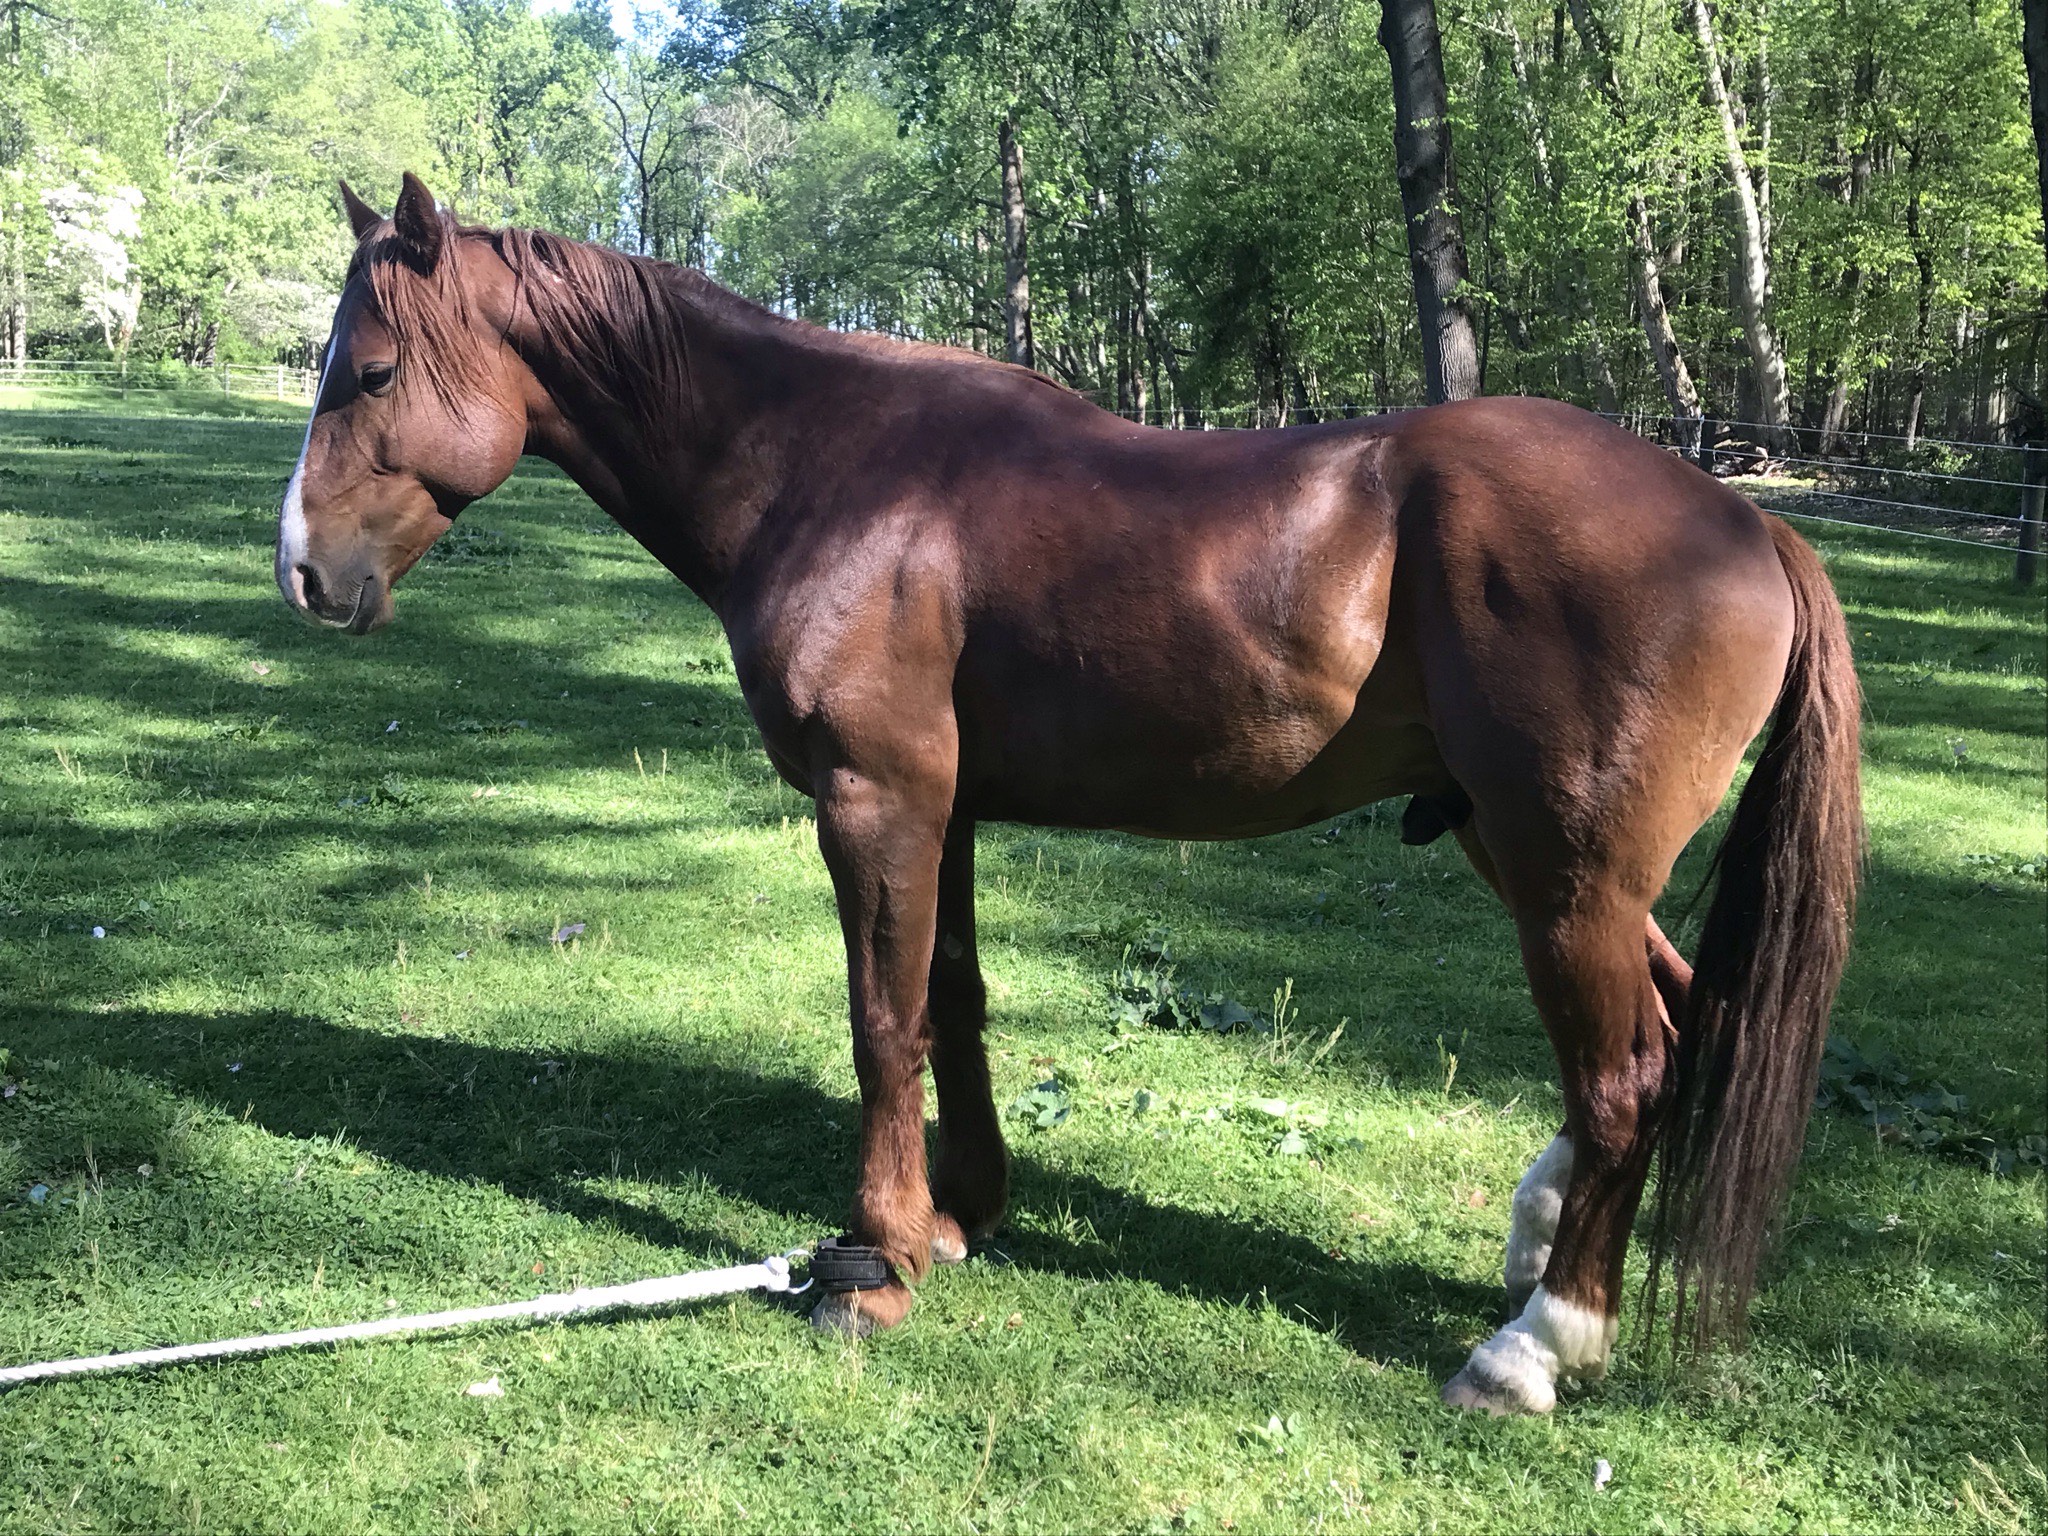 Reddish brown horse standing, looking left, with a rope tied to its front left leg. The horse is standing on green grass with green trees in the background.